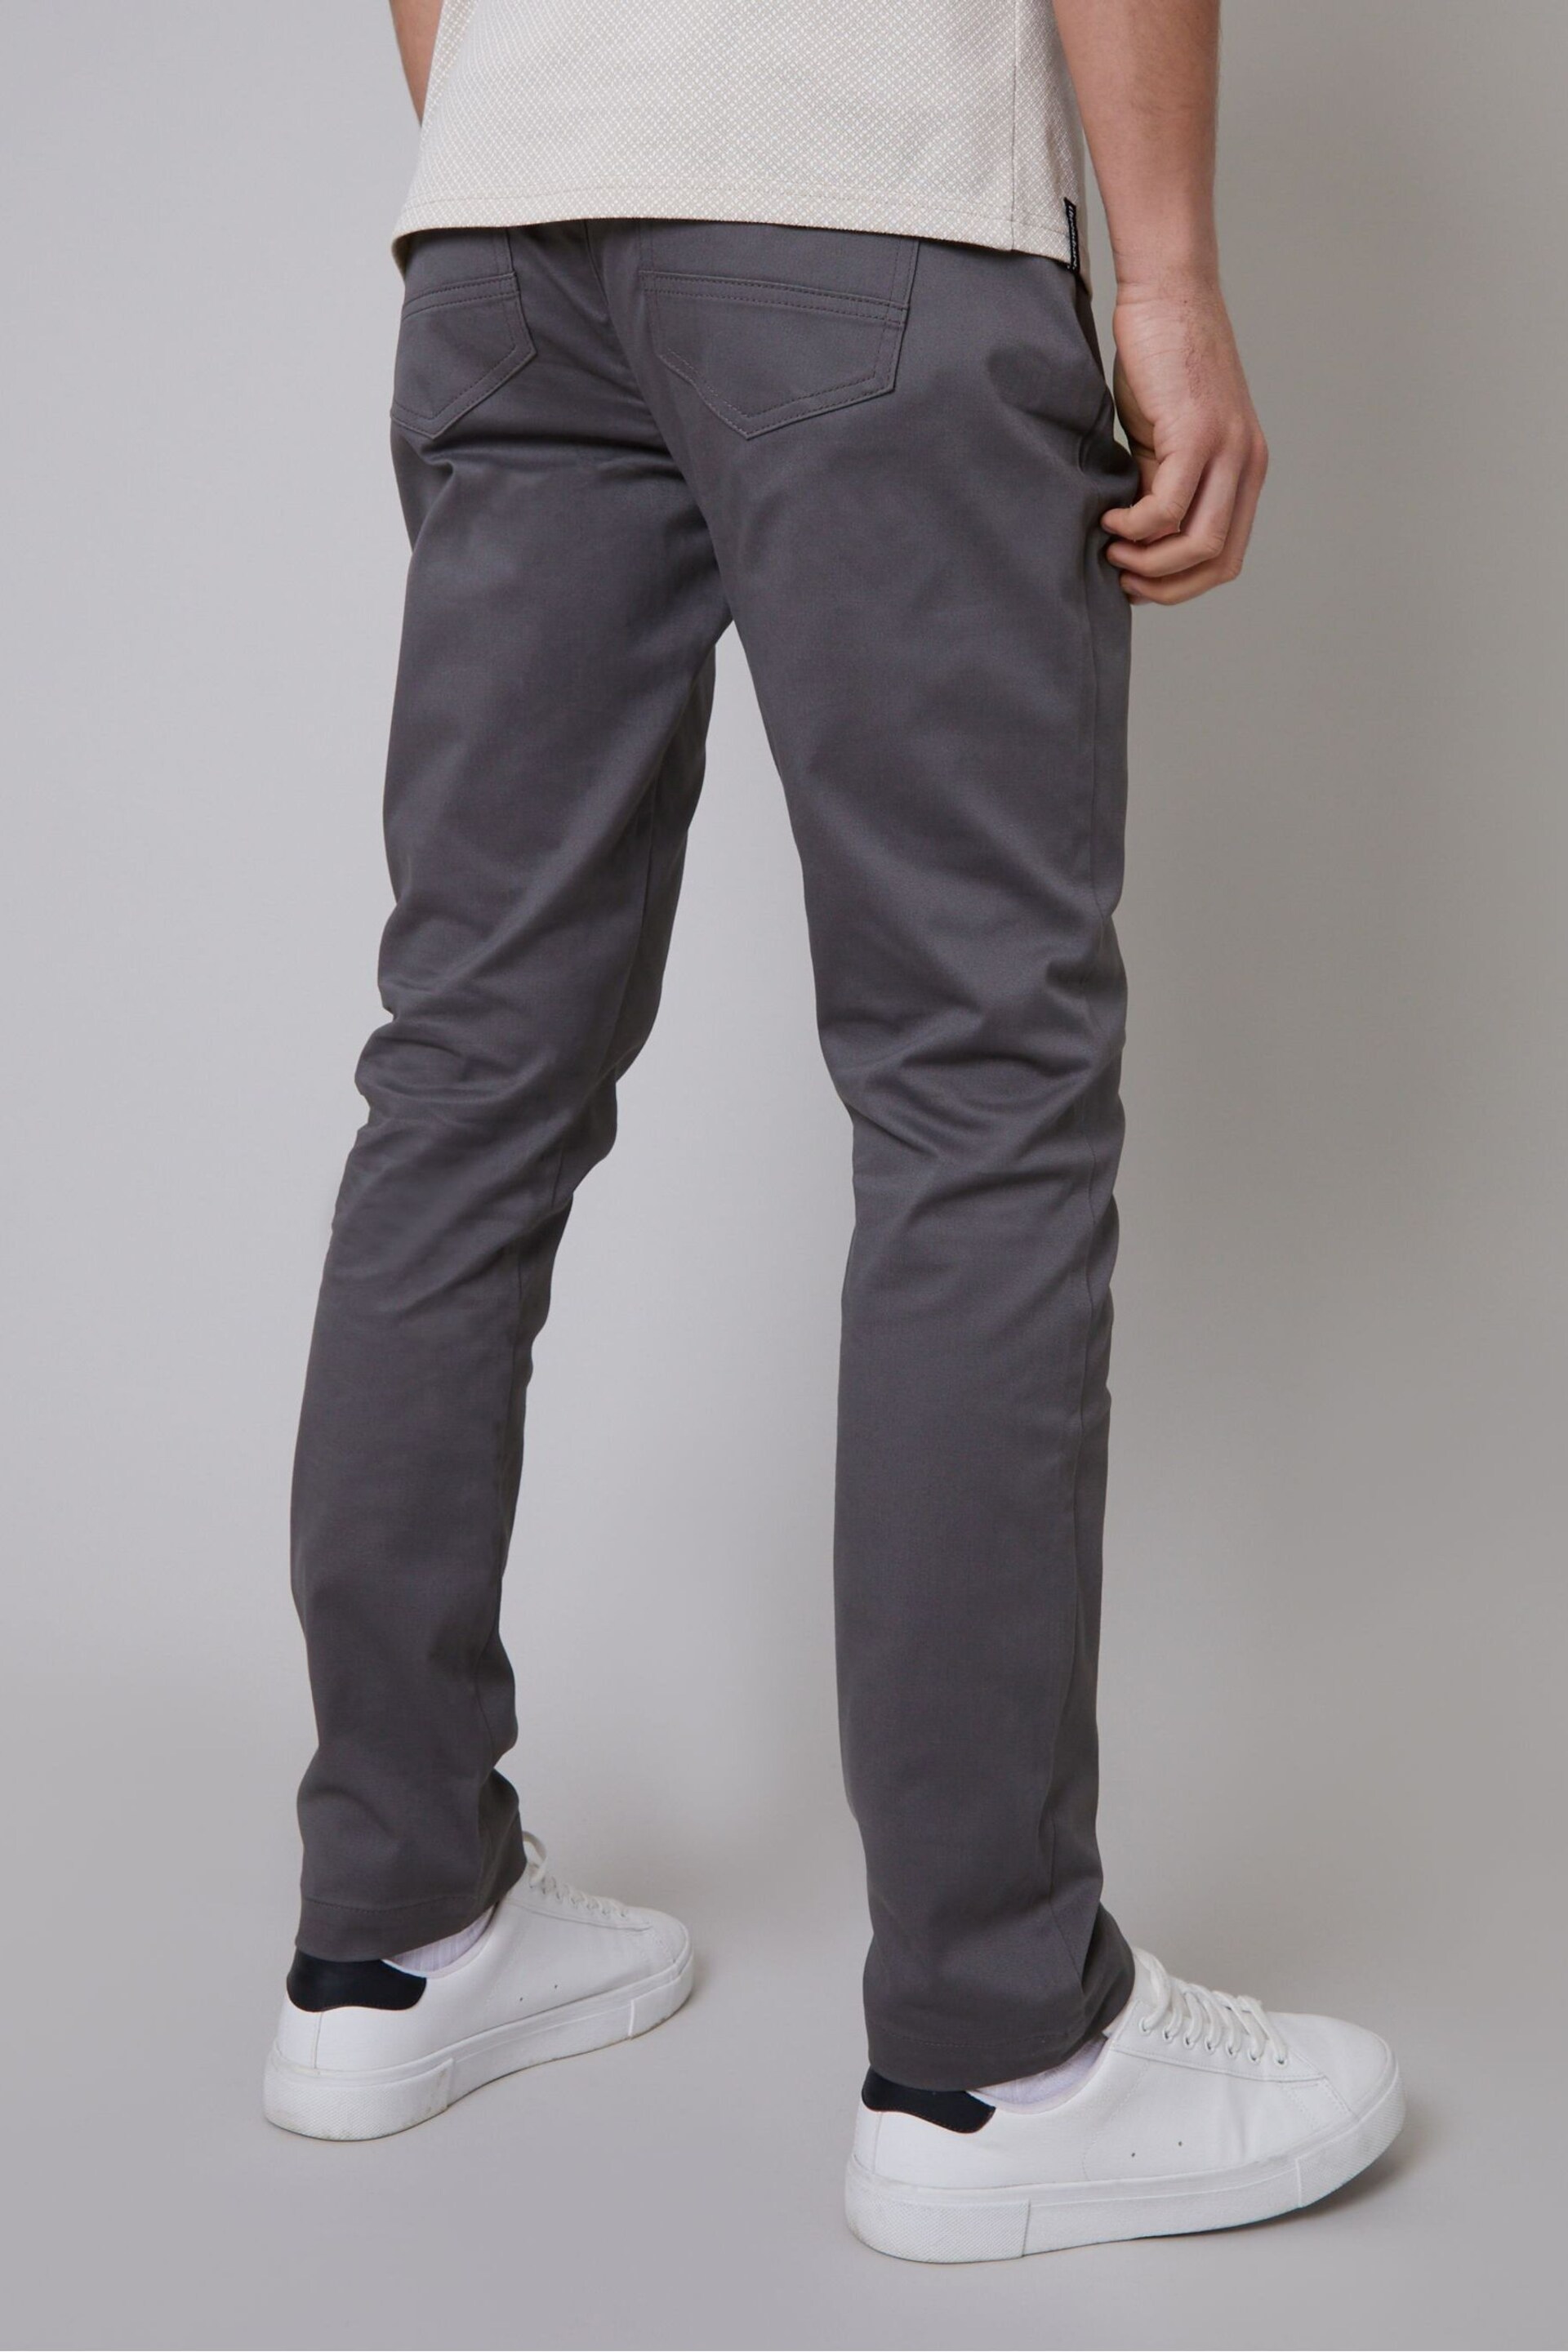 Threadbare Grey Cotton Slim Fit 5 Pocket Chino Trousers With Stretch - Image 2 of 4